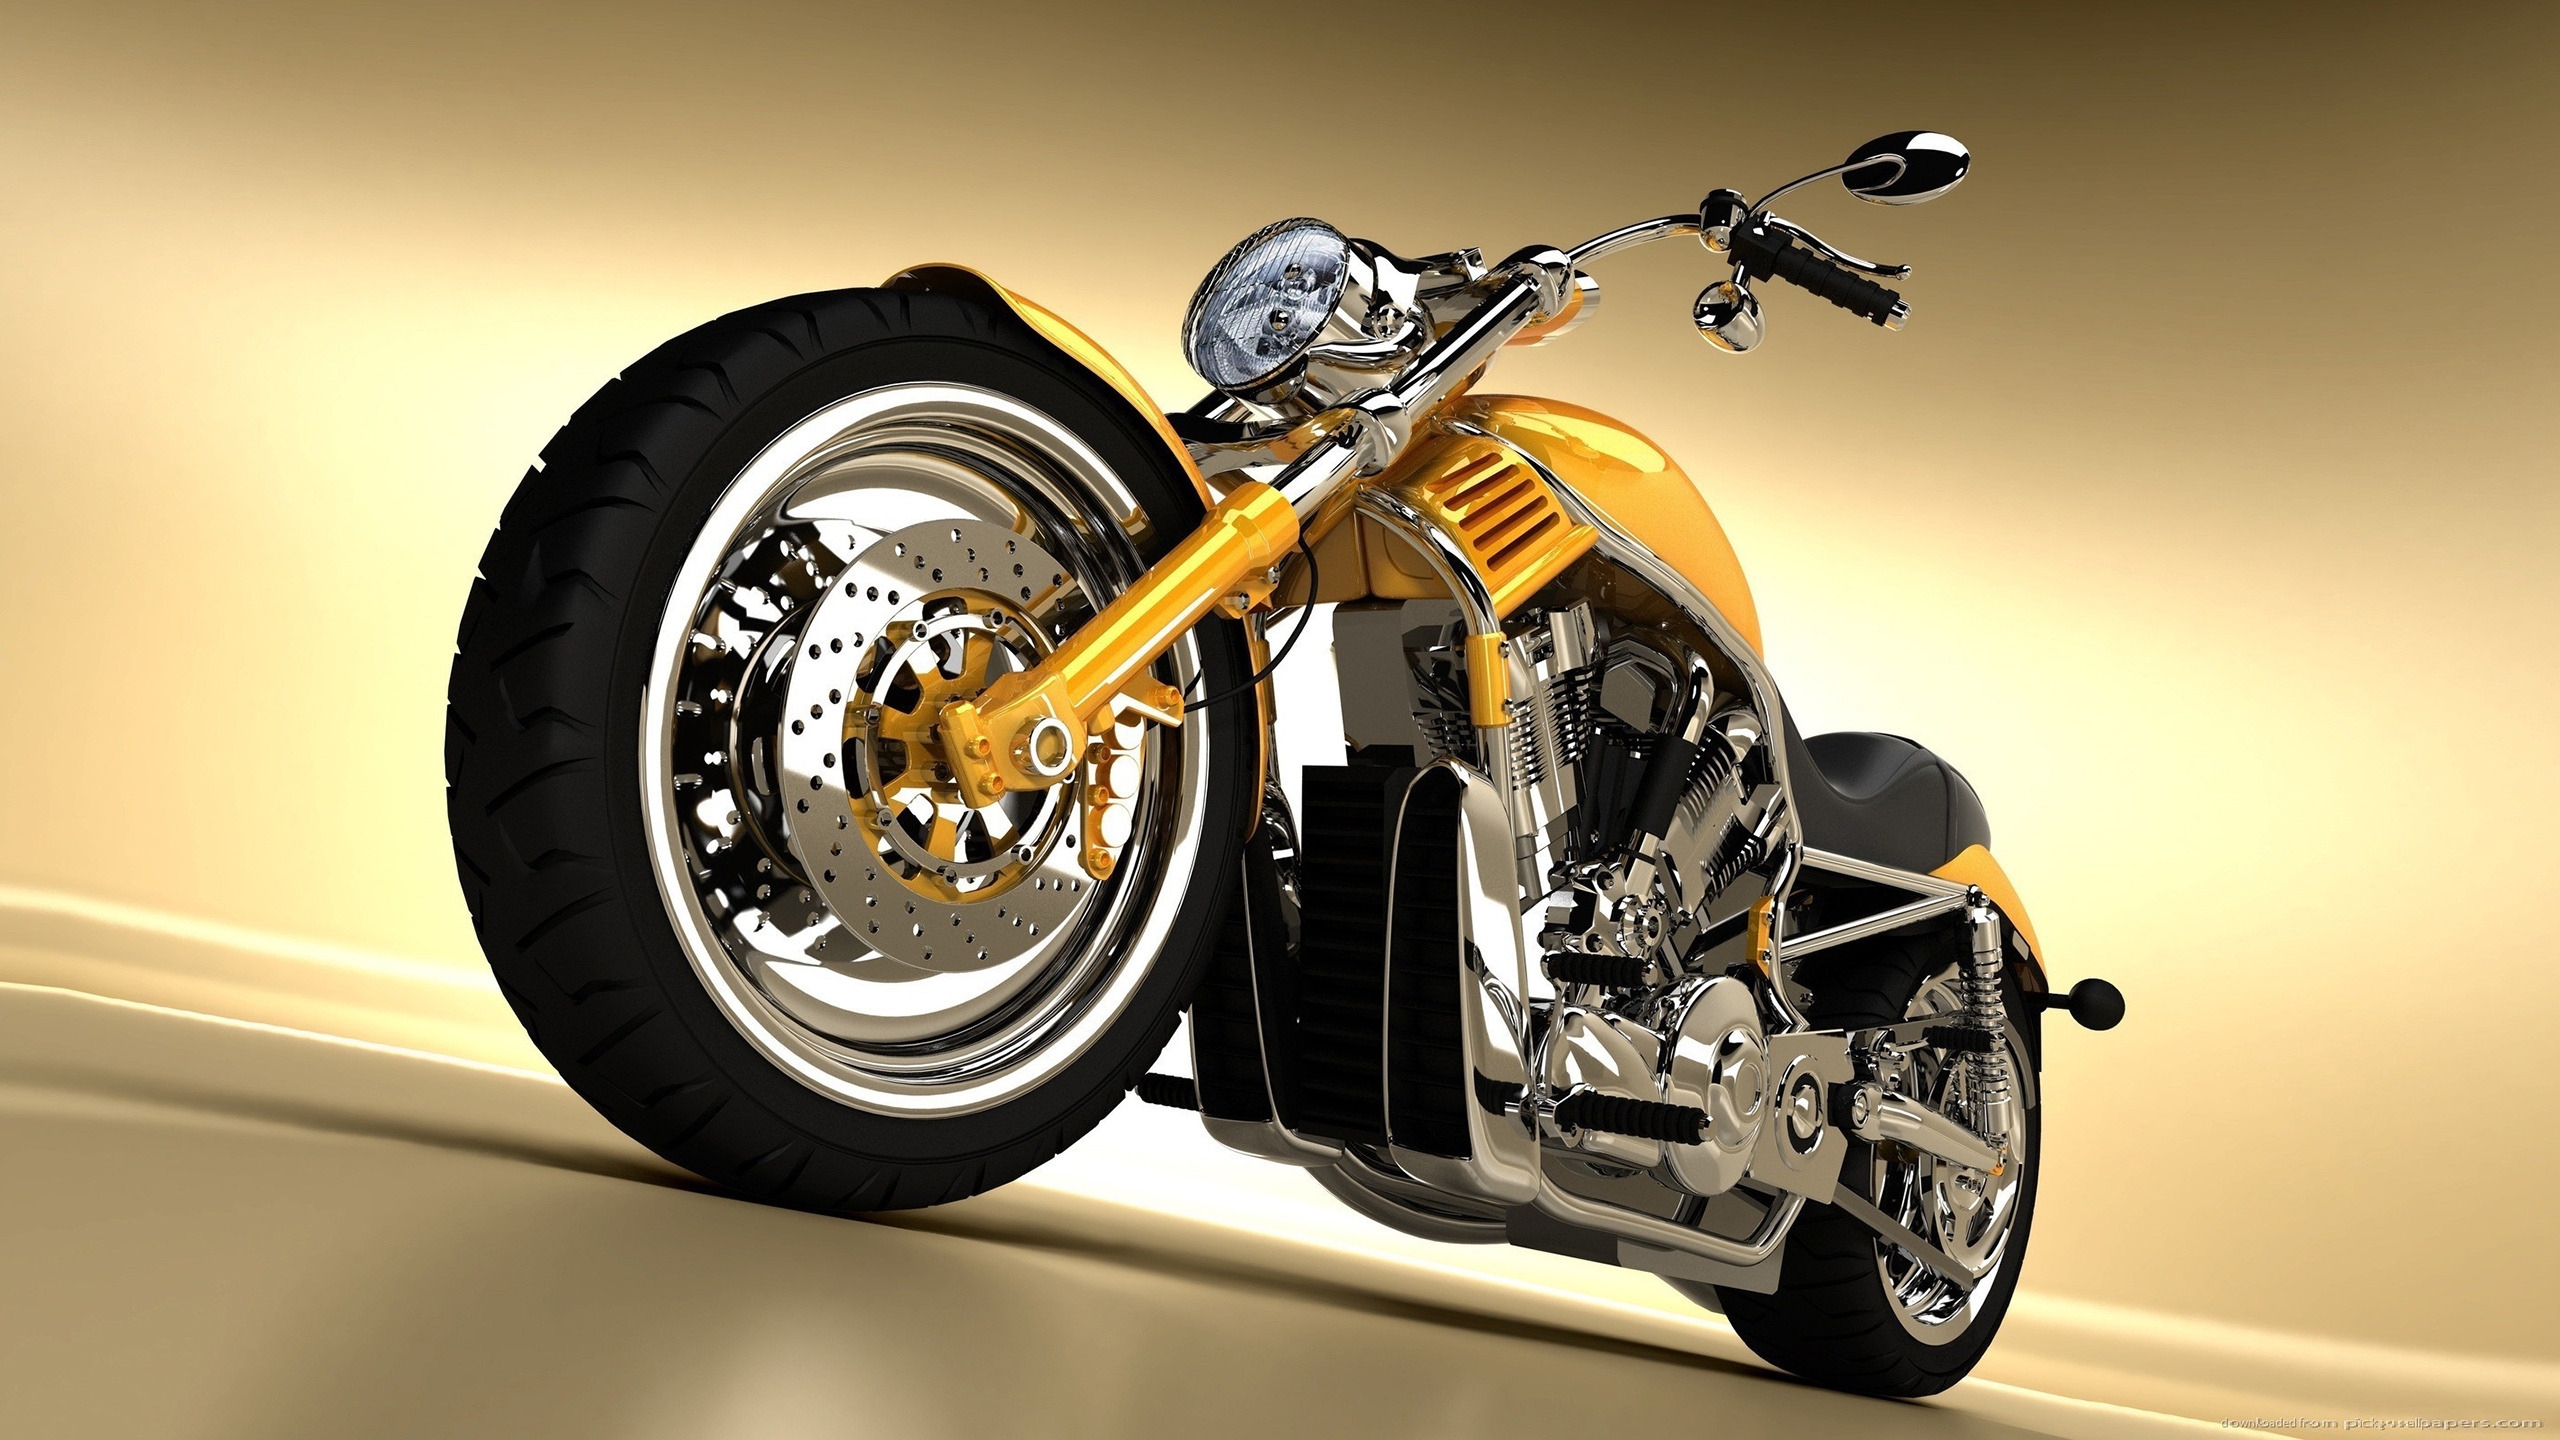 Gorgeous Yellow Chopper for 2560x1440 HDTV resolution